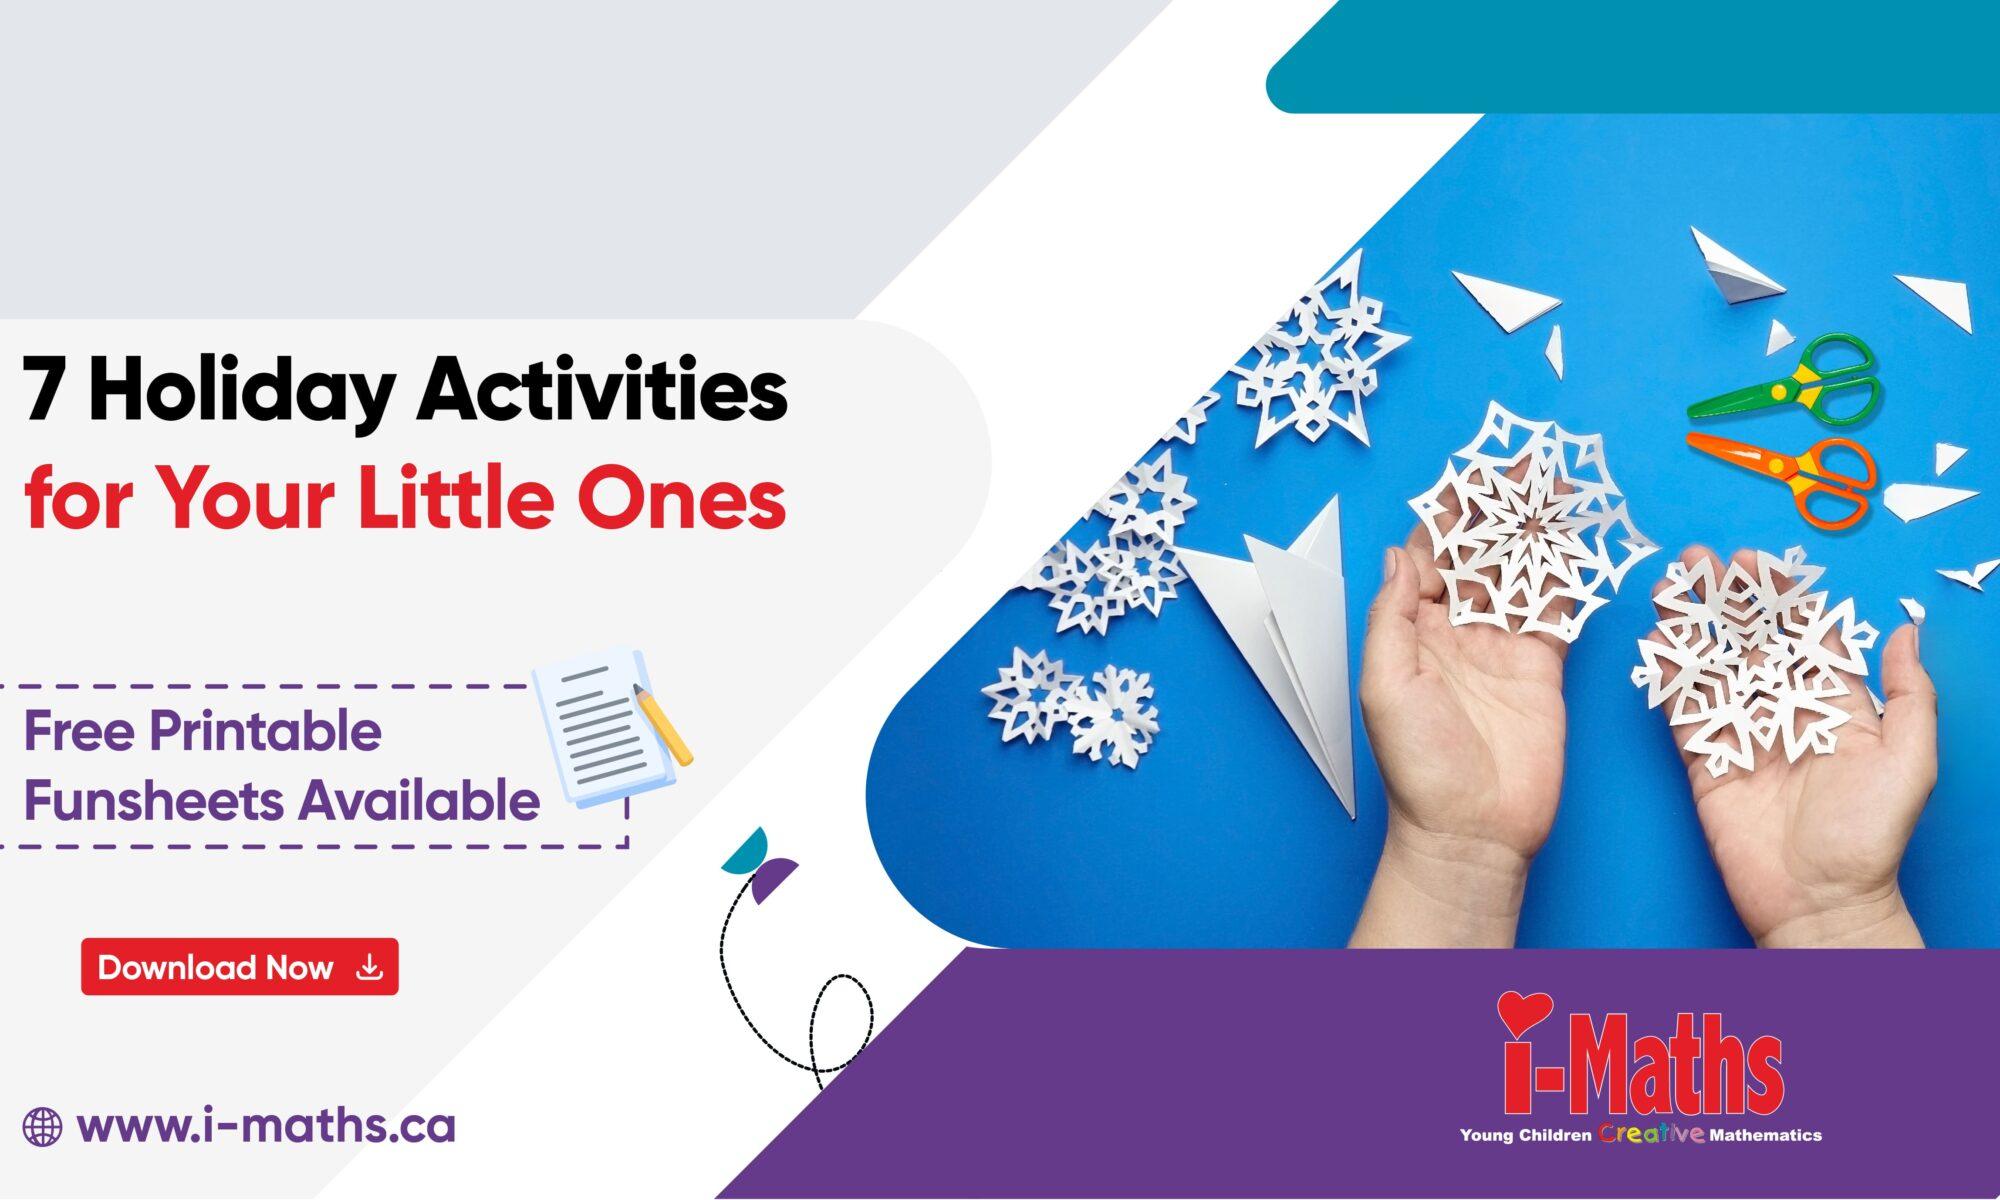 Blog Banner: 7 holiday activities for your little ones free printable funsheets download now